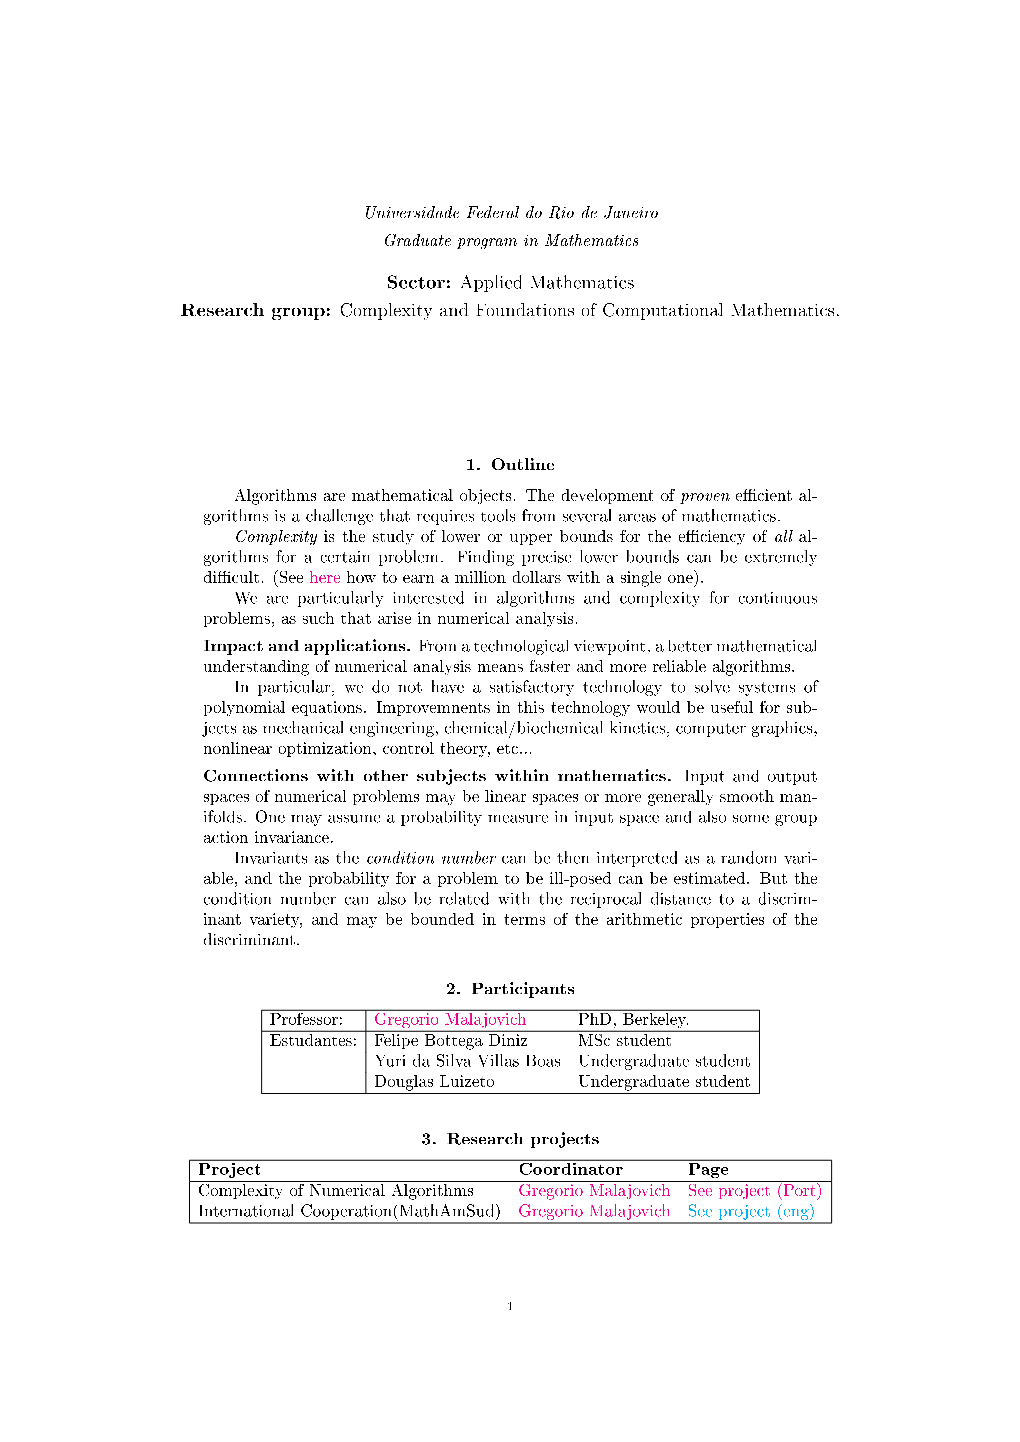 Complexity and Foundations of Computational Mathematics. 1